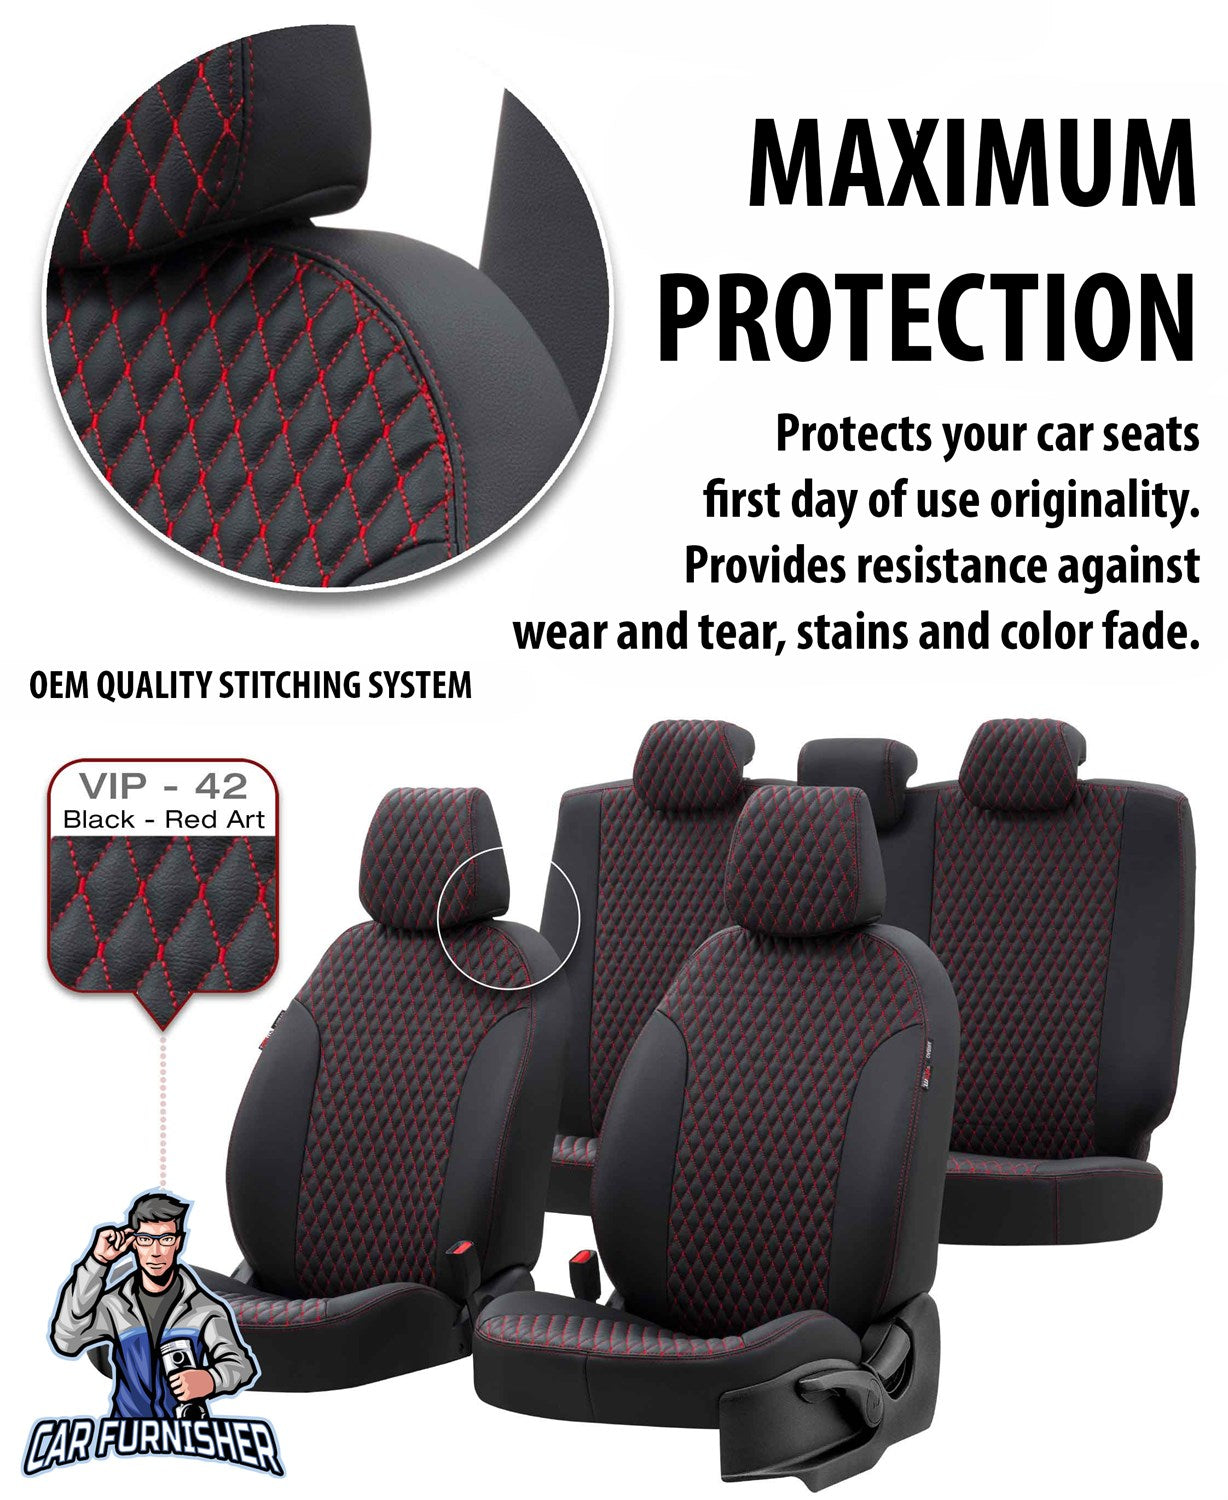 Chevrolet Rezzo Seat Covers Amsterdam Leather Design Smoked Black Leather